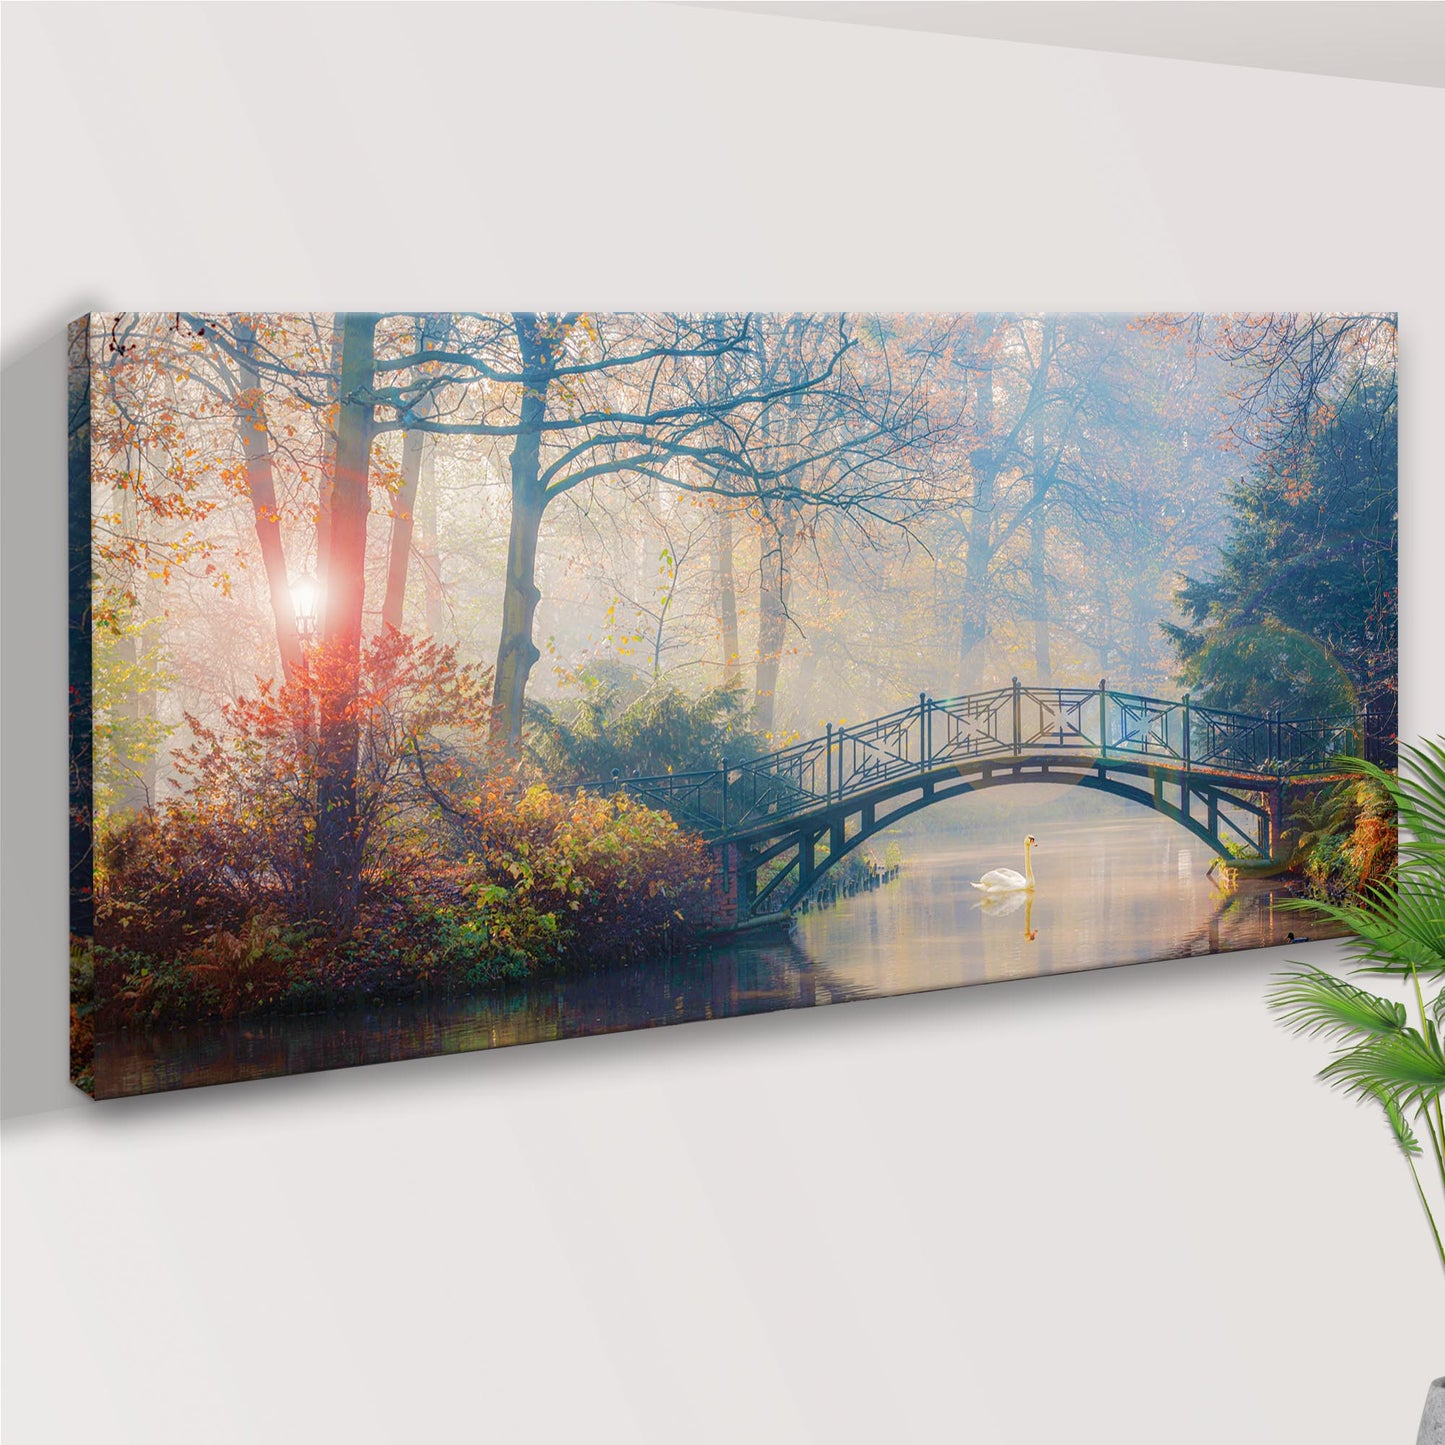 Misty Park Bridge Canvas Wall Art Style 1 - Image by Tailored Canvases